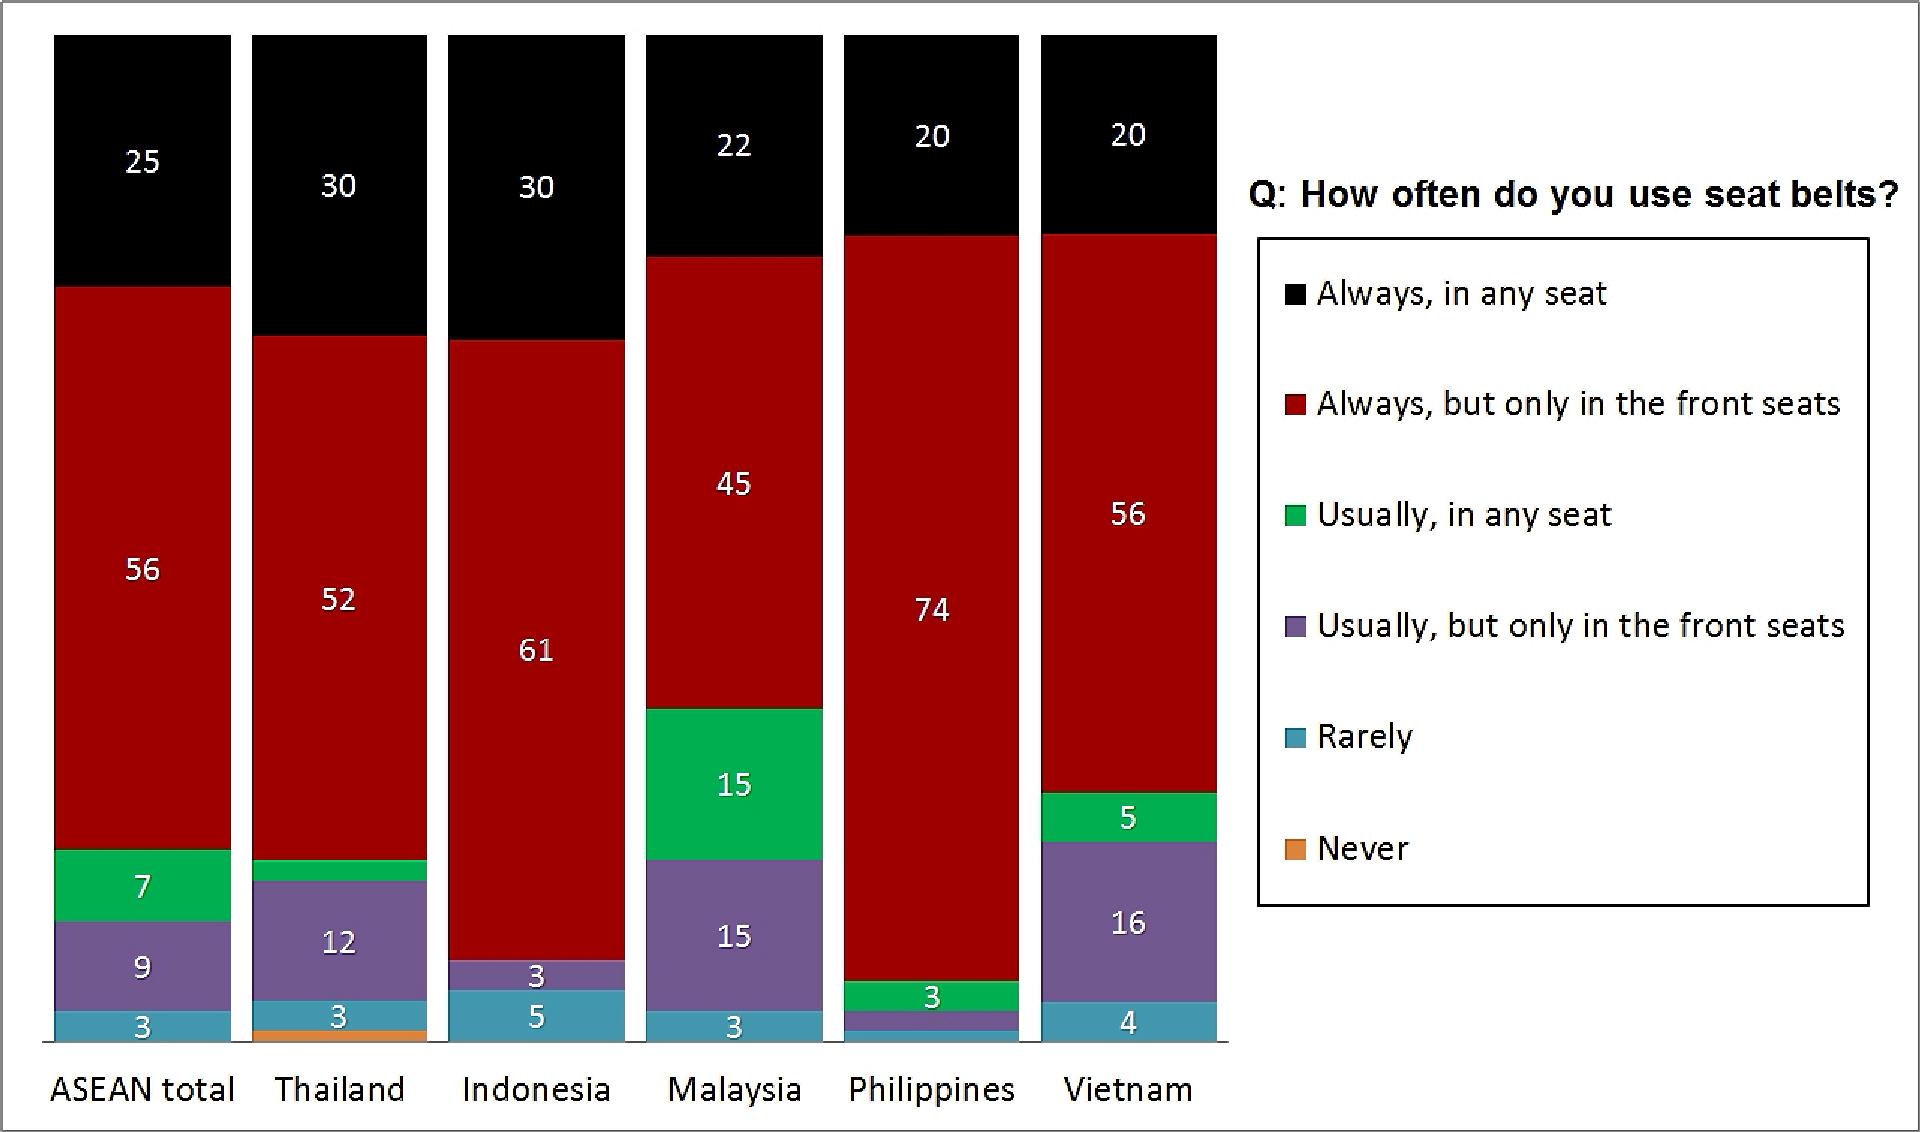 Vehicle Safety Study in ASEAN (Thailand, Indonesia, Malaysia, Philippines and Vietnam) on Seat Belt Usage (Toyota, June 2013)